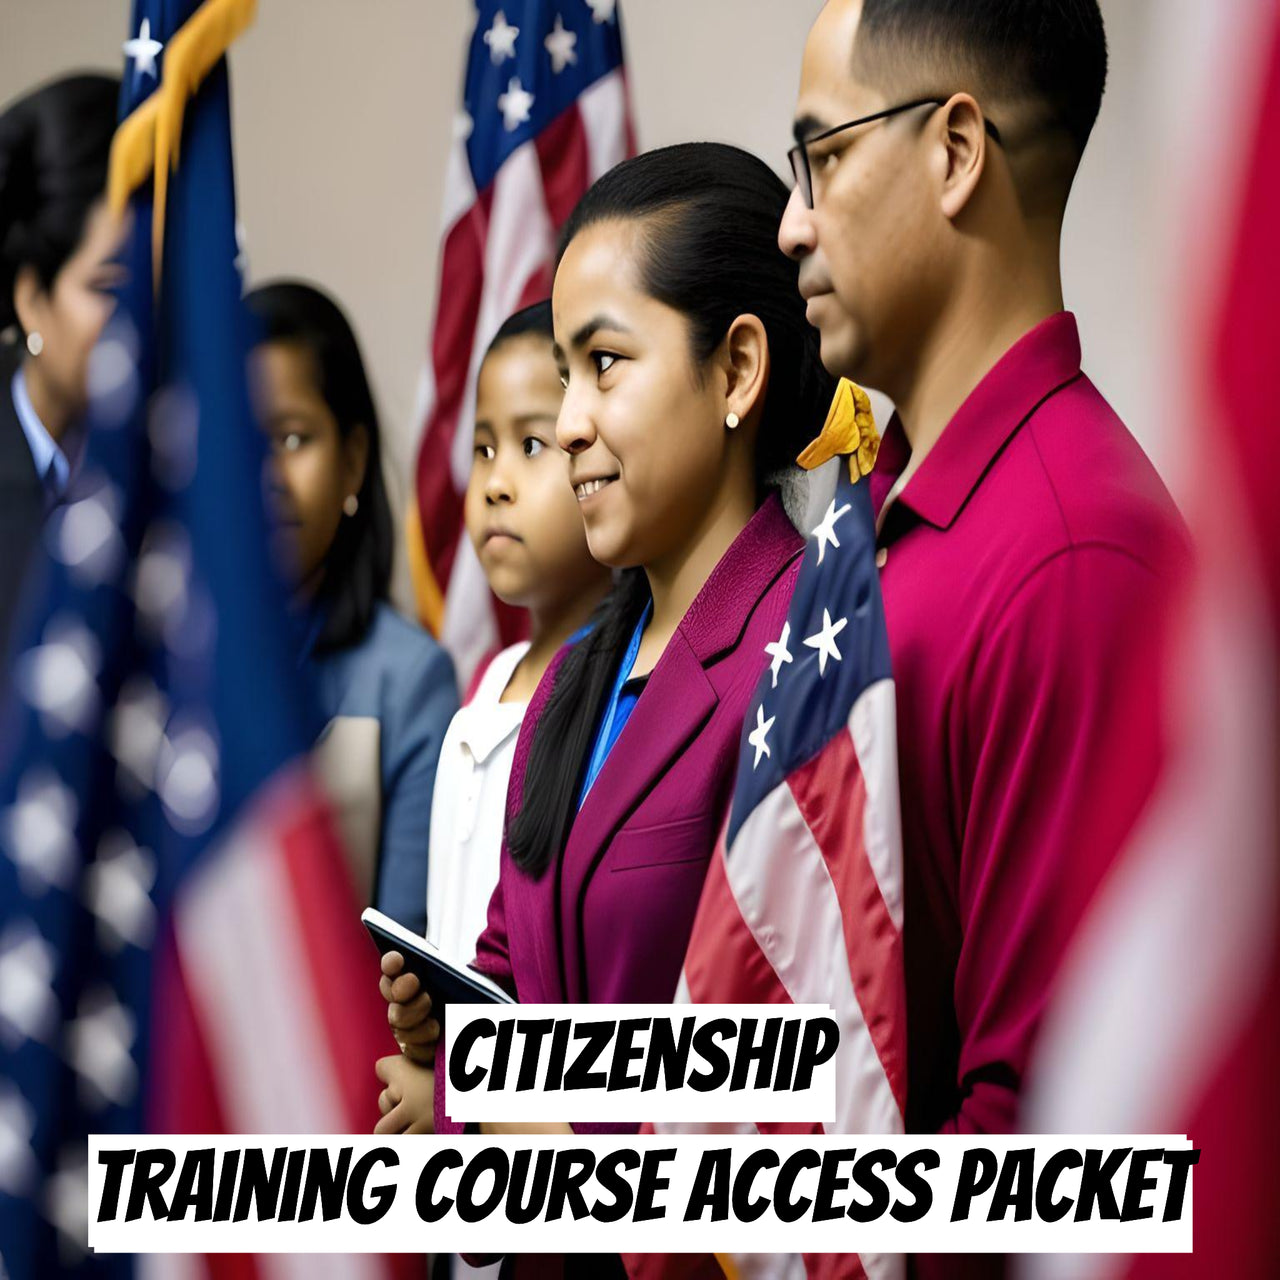 Citizenship Training Course Access Packet